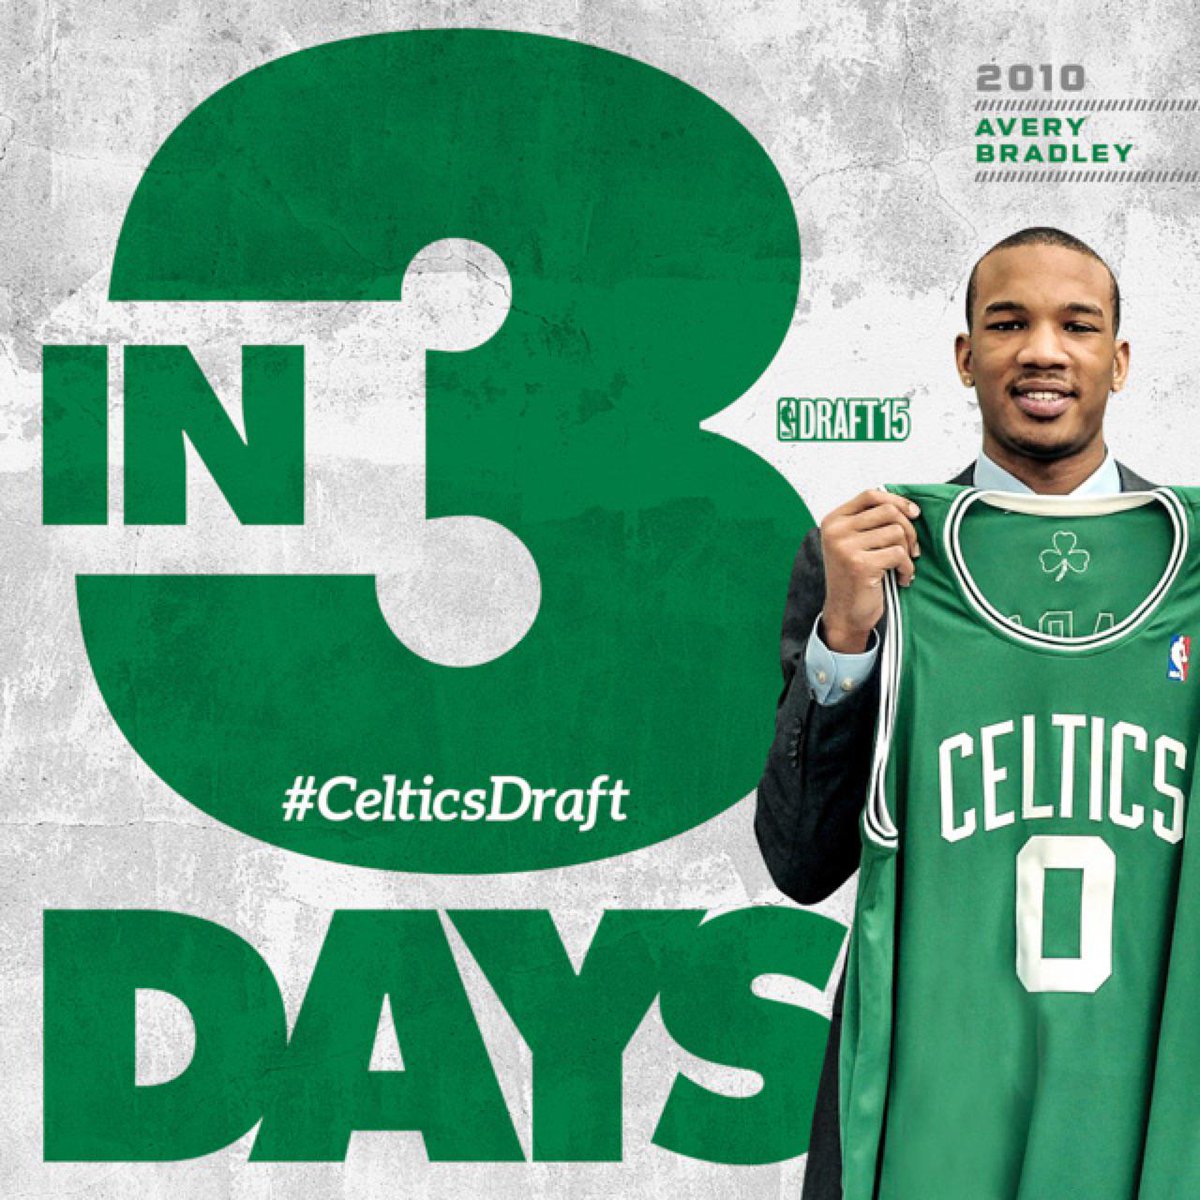 The 2015 @NBADraft is just 3 days away. Who will end up in green this year? #CelticsDraft http://t.co/wecHLAQvtL